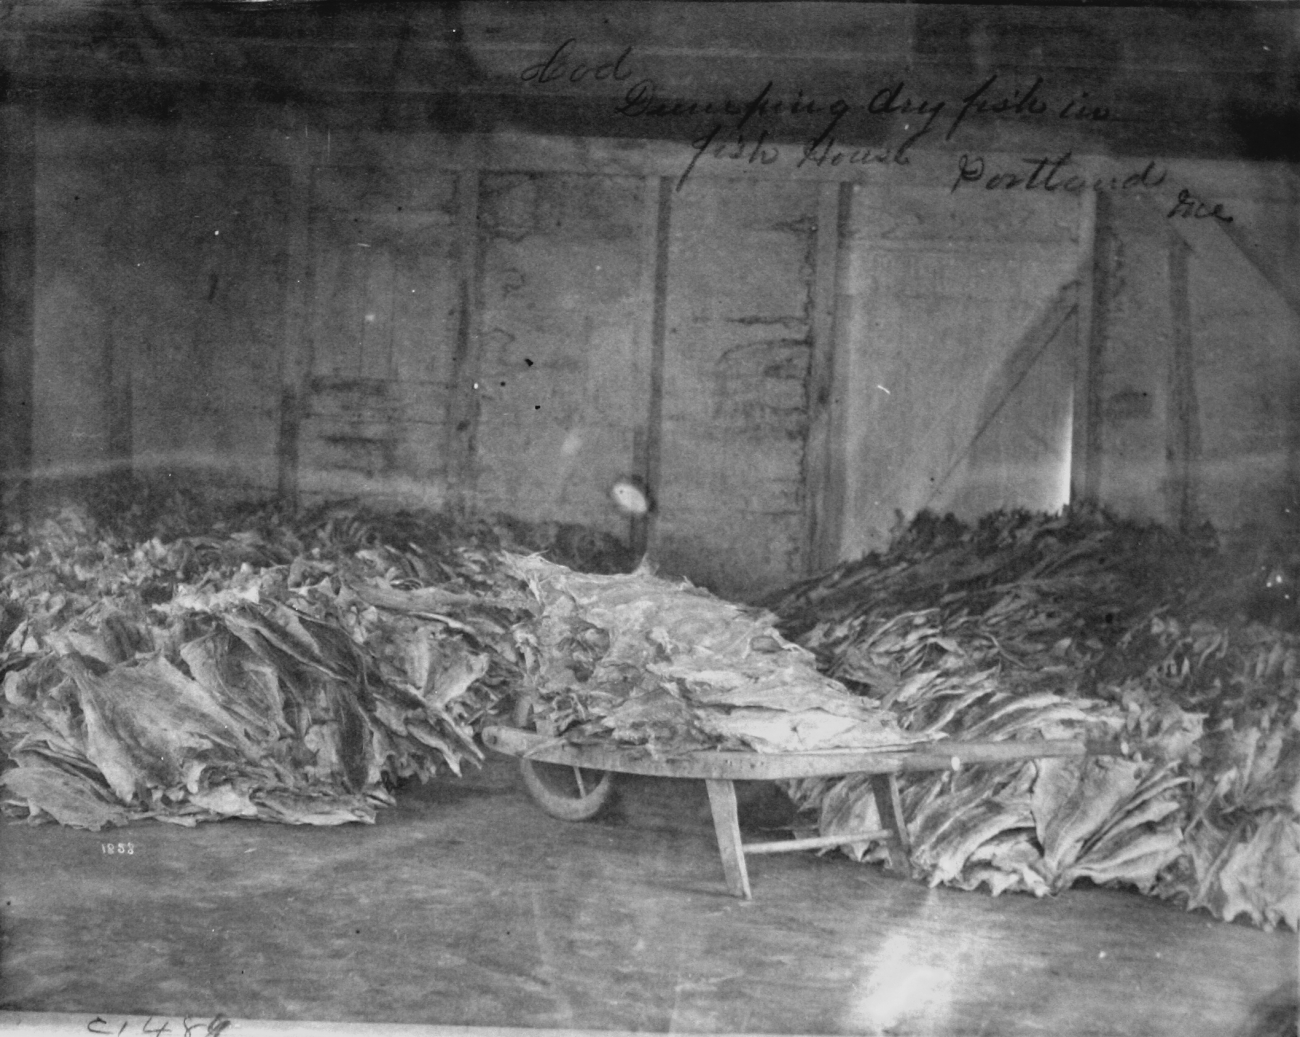 Cod, dumping dry fish in fish house, Portland, ME